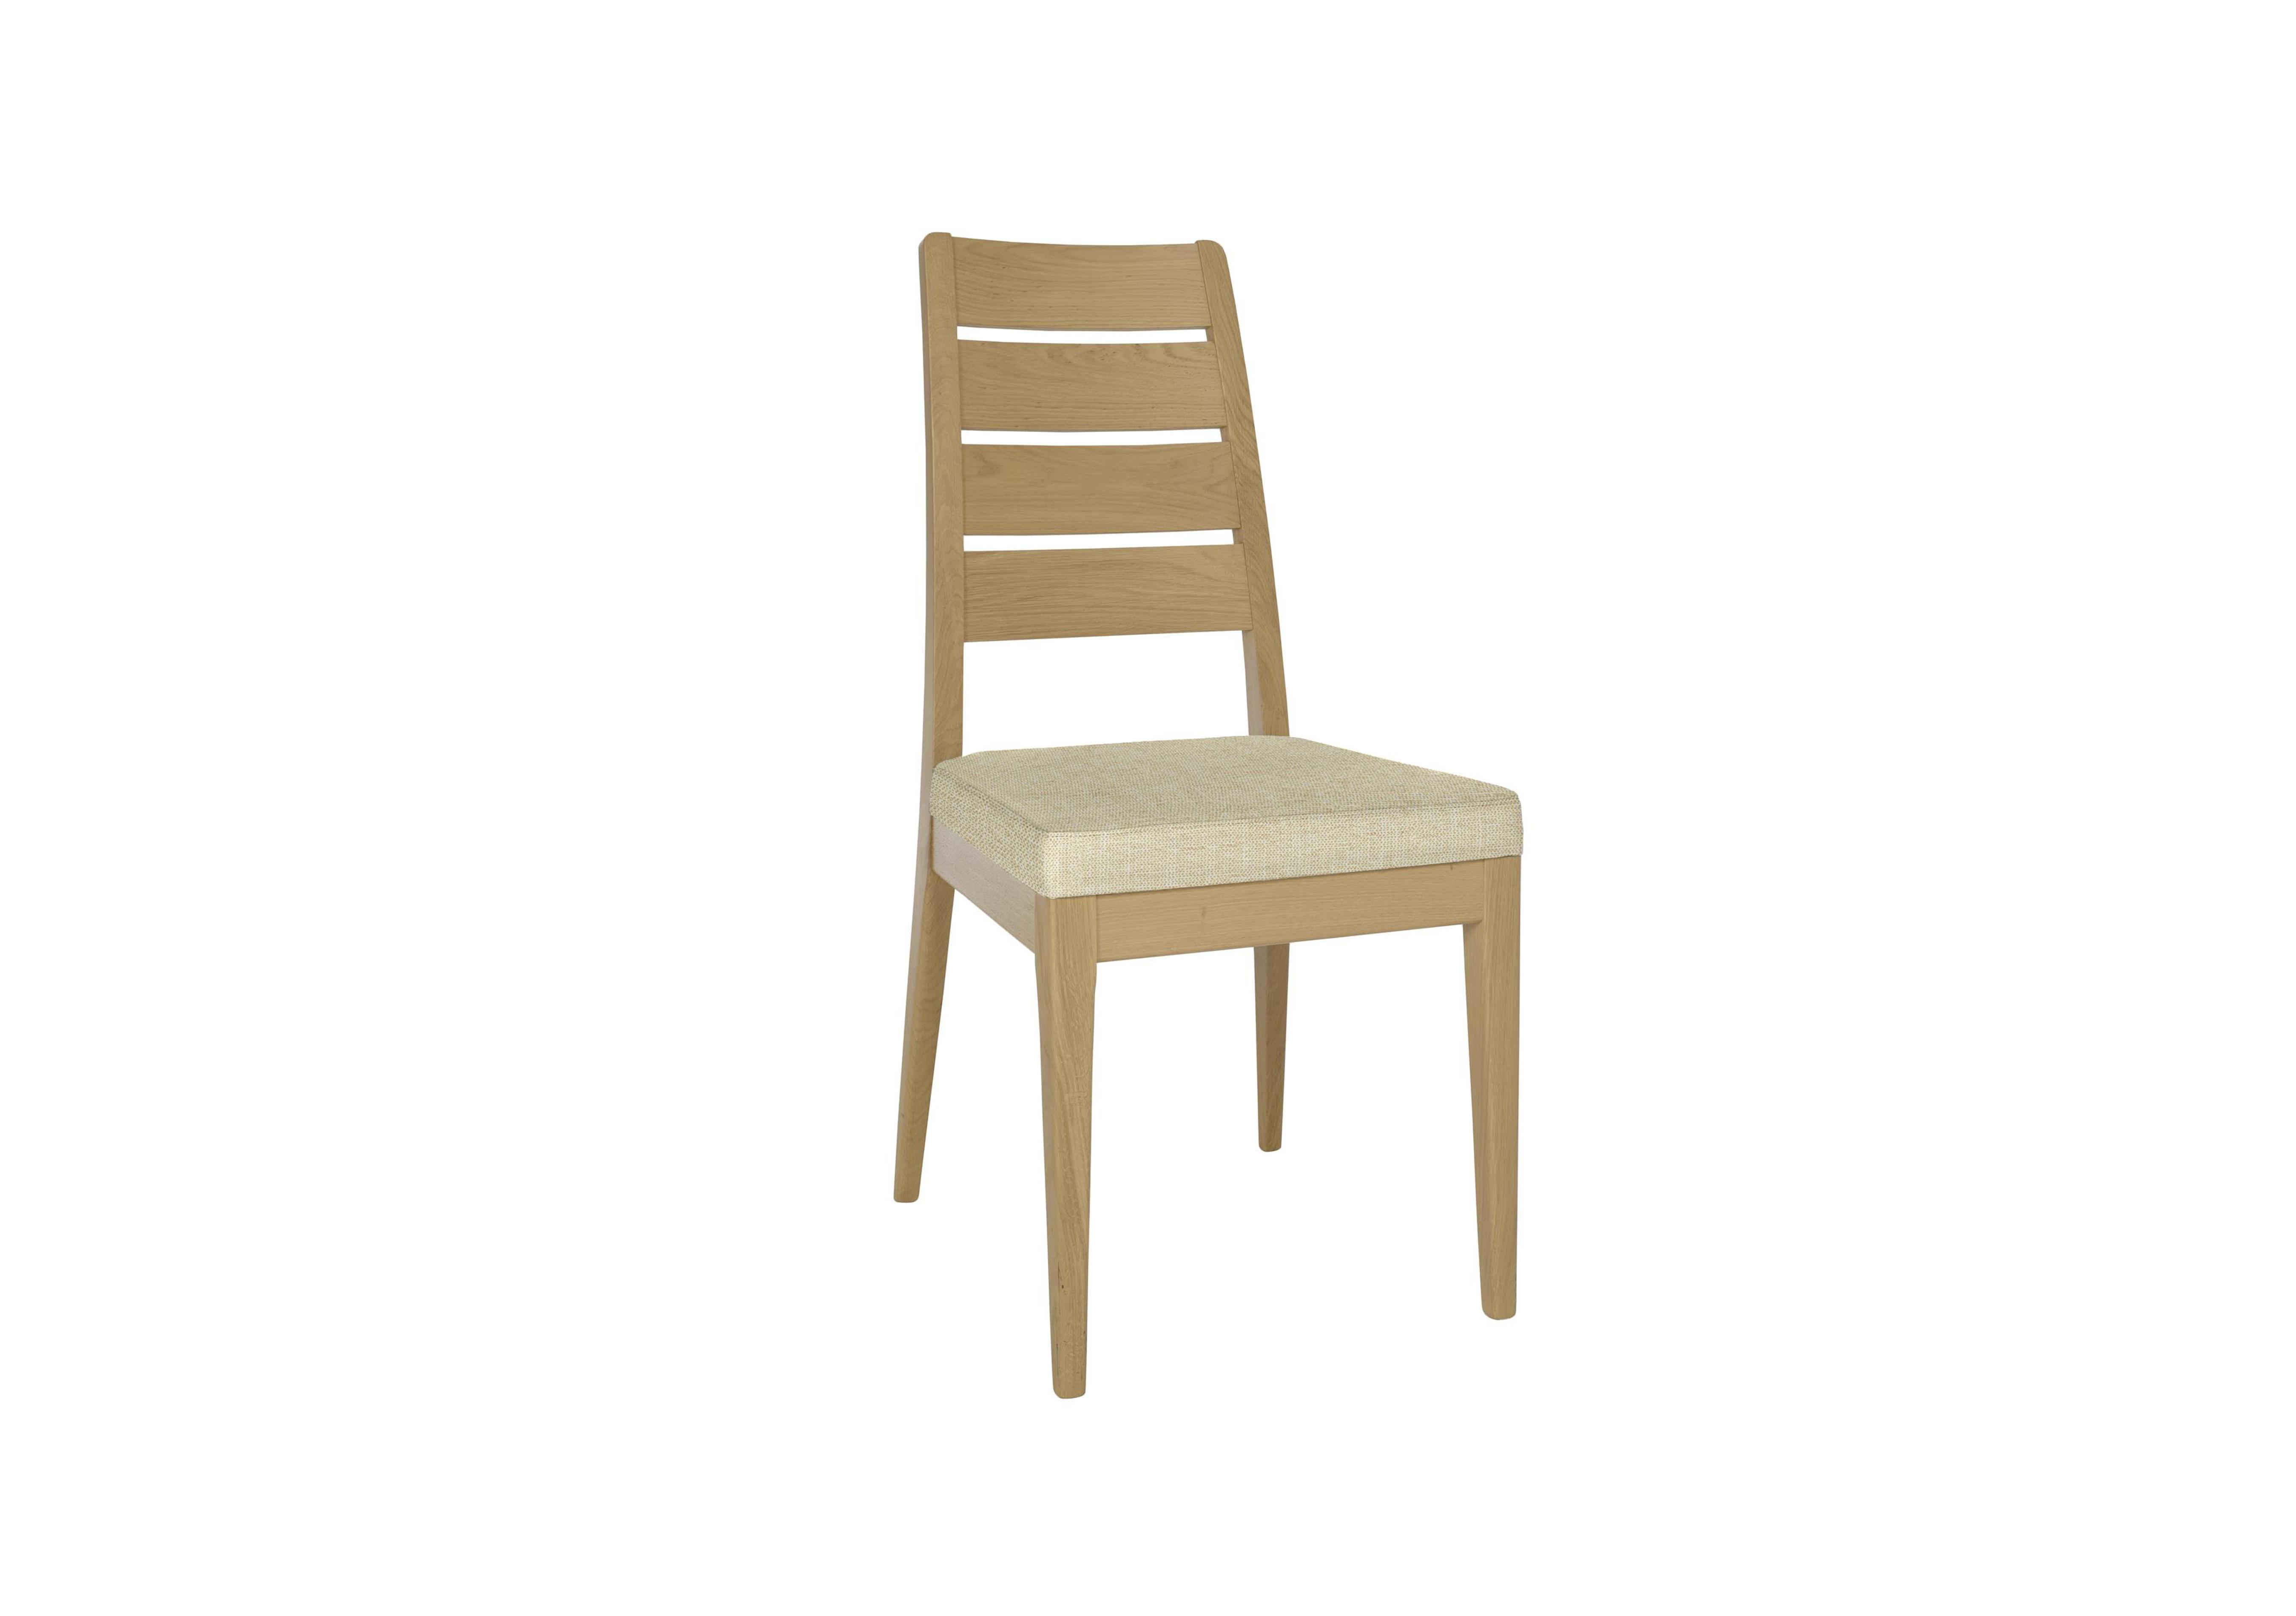 Romana Slatted Dining Chair in C710 on Furniture Village